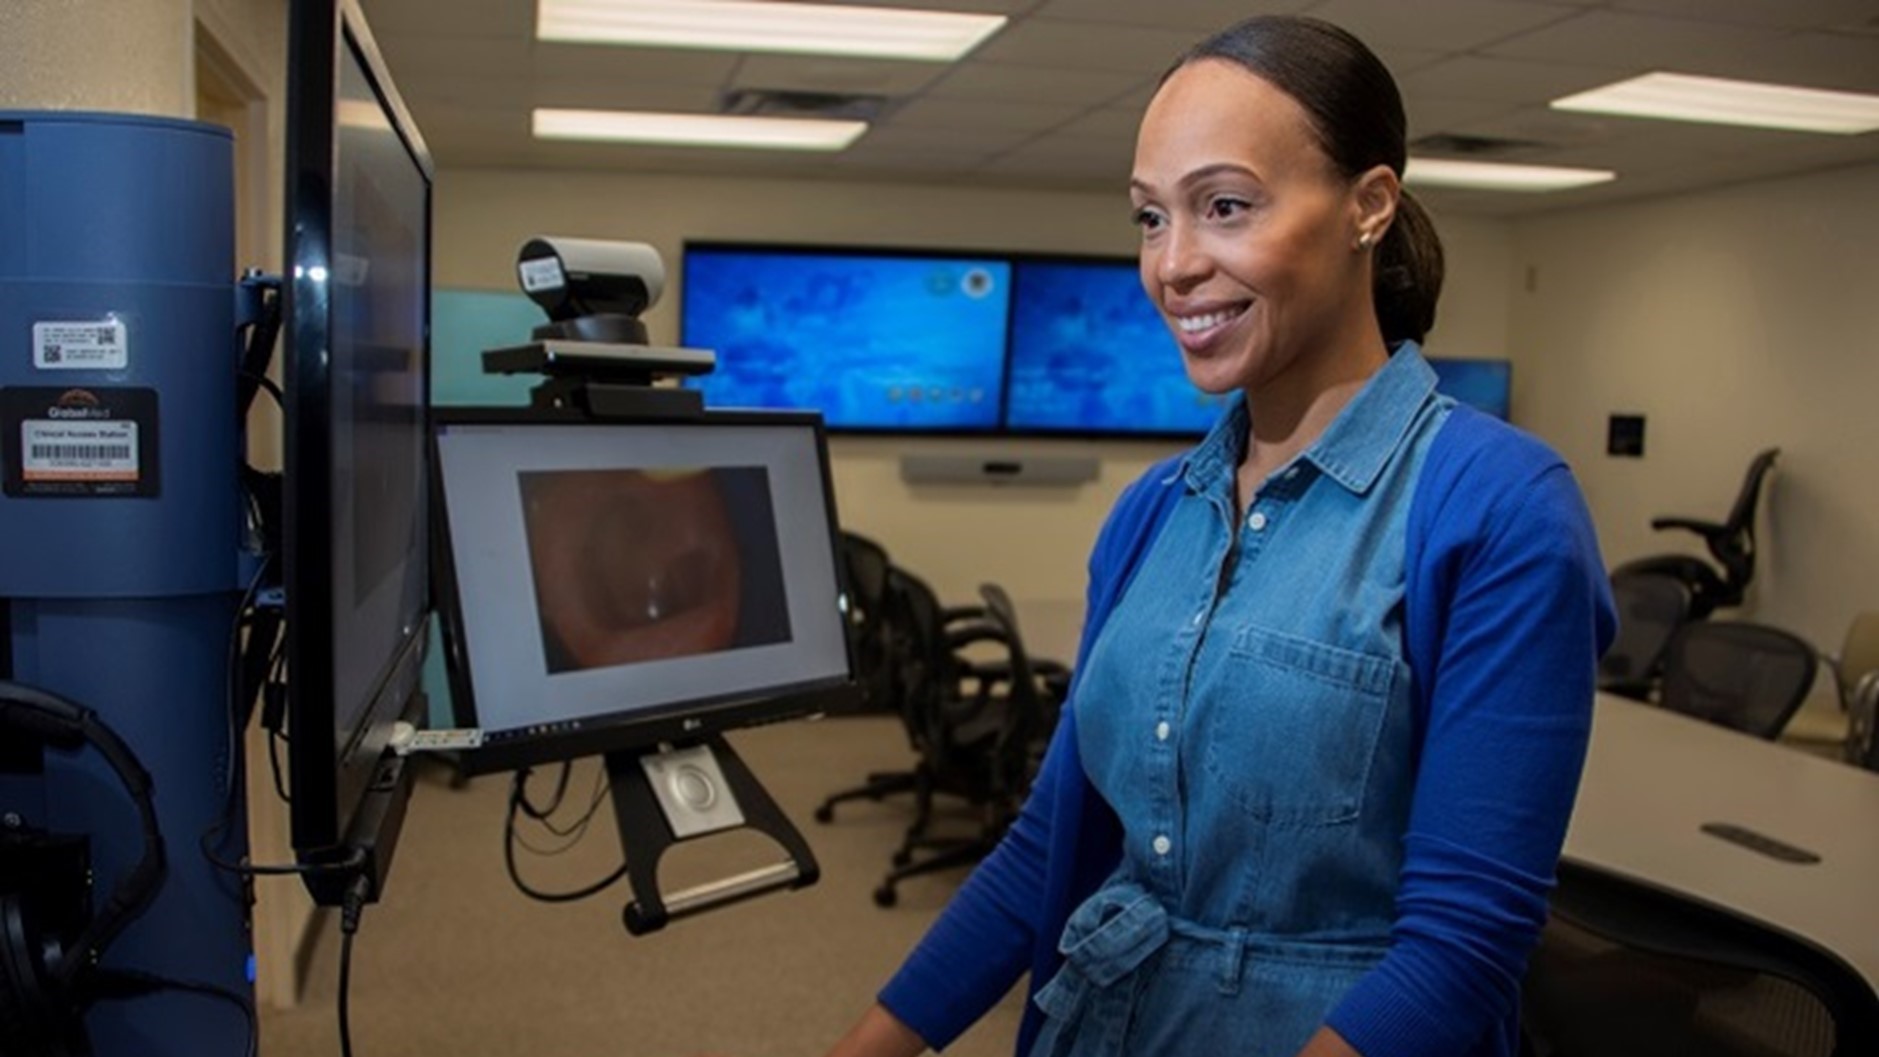 New-age Virtual Nursing Supporting Work Efficiency During Labor Shortage